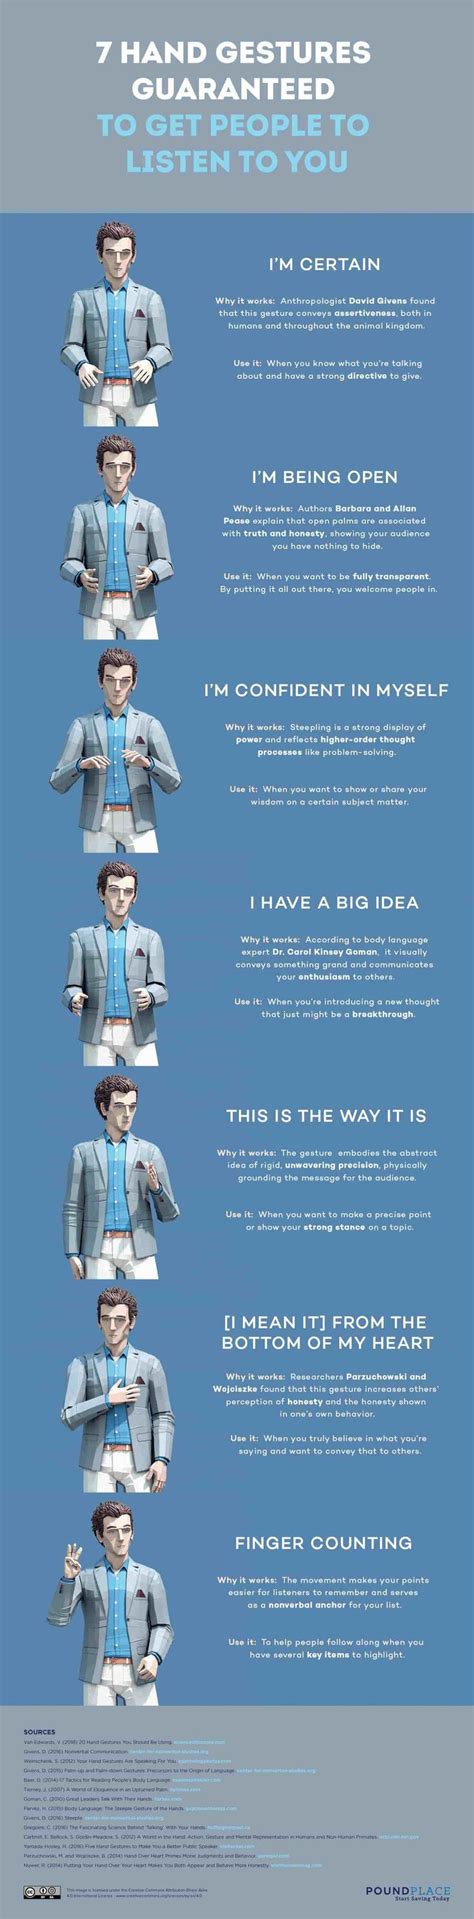 How To Use Hand Gestures To Be An Engaging Speaker Public Speaking Infographic Life Skills